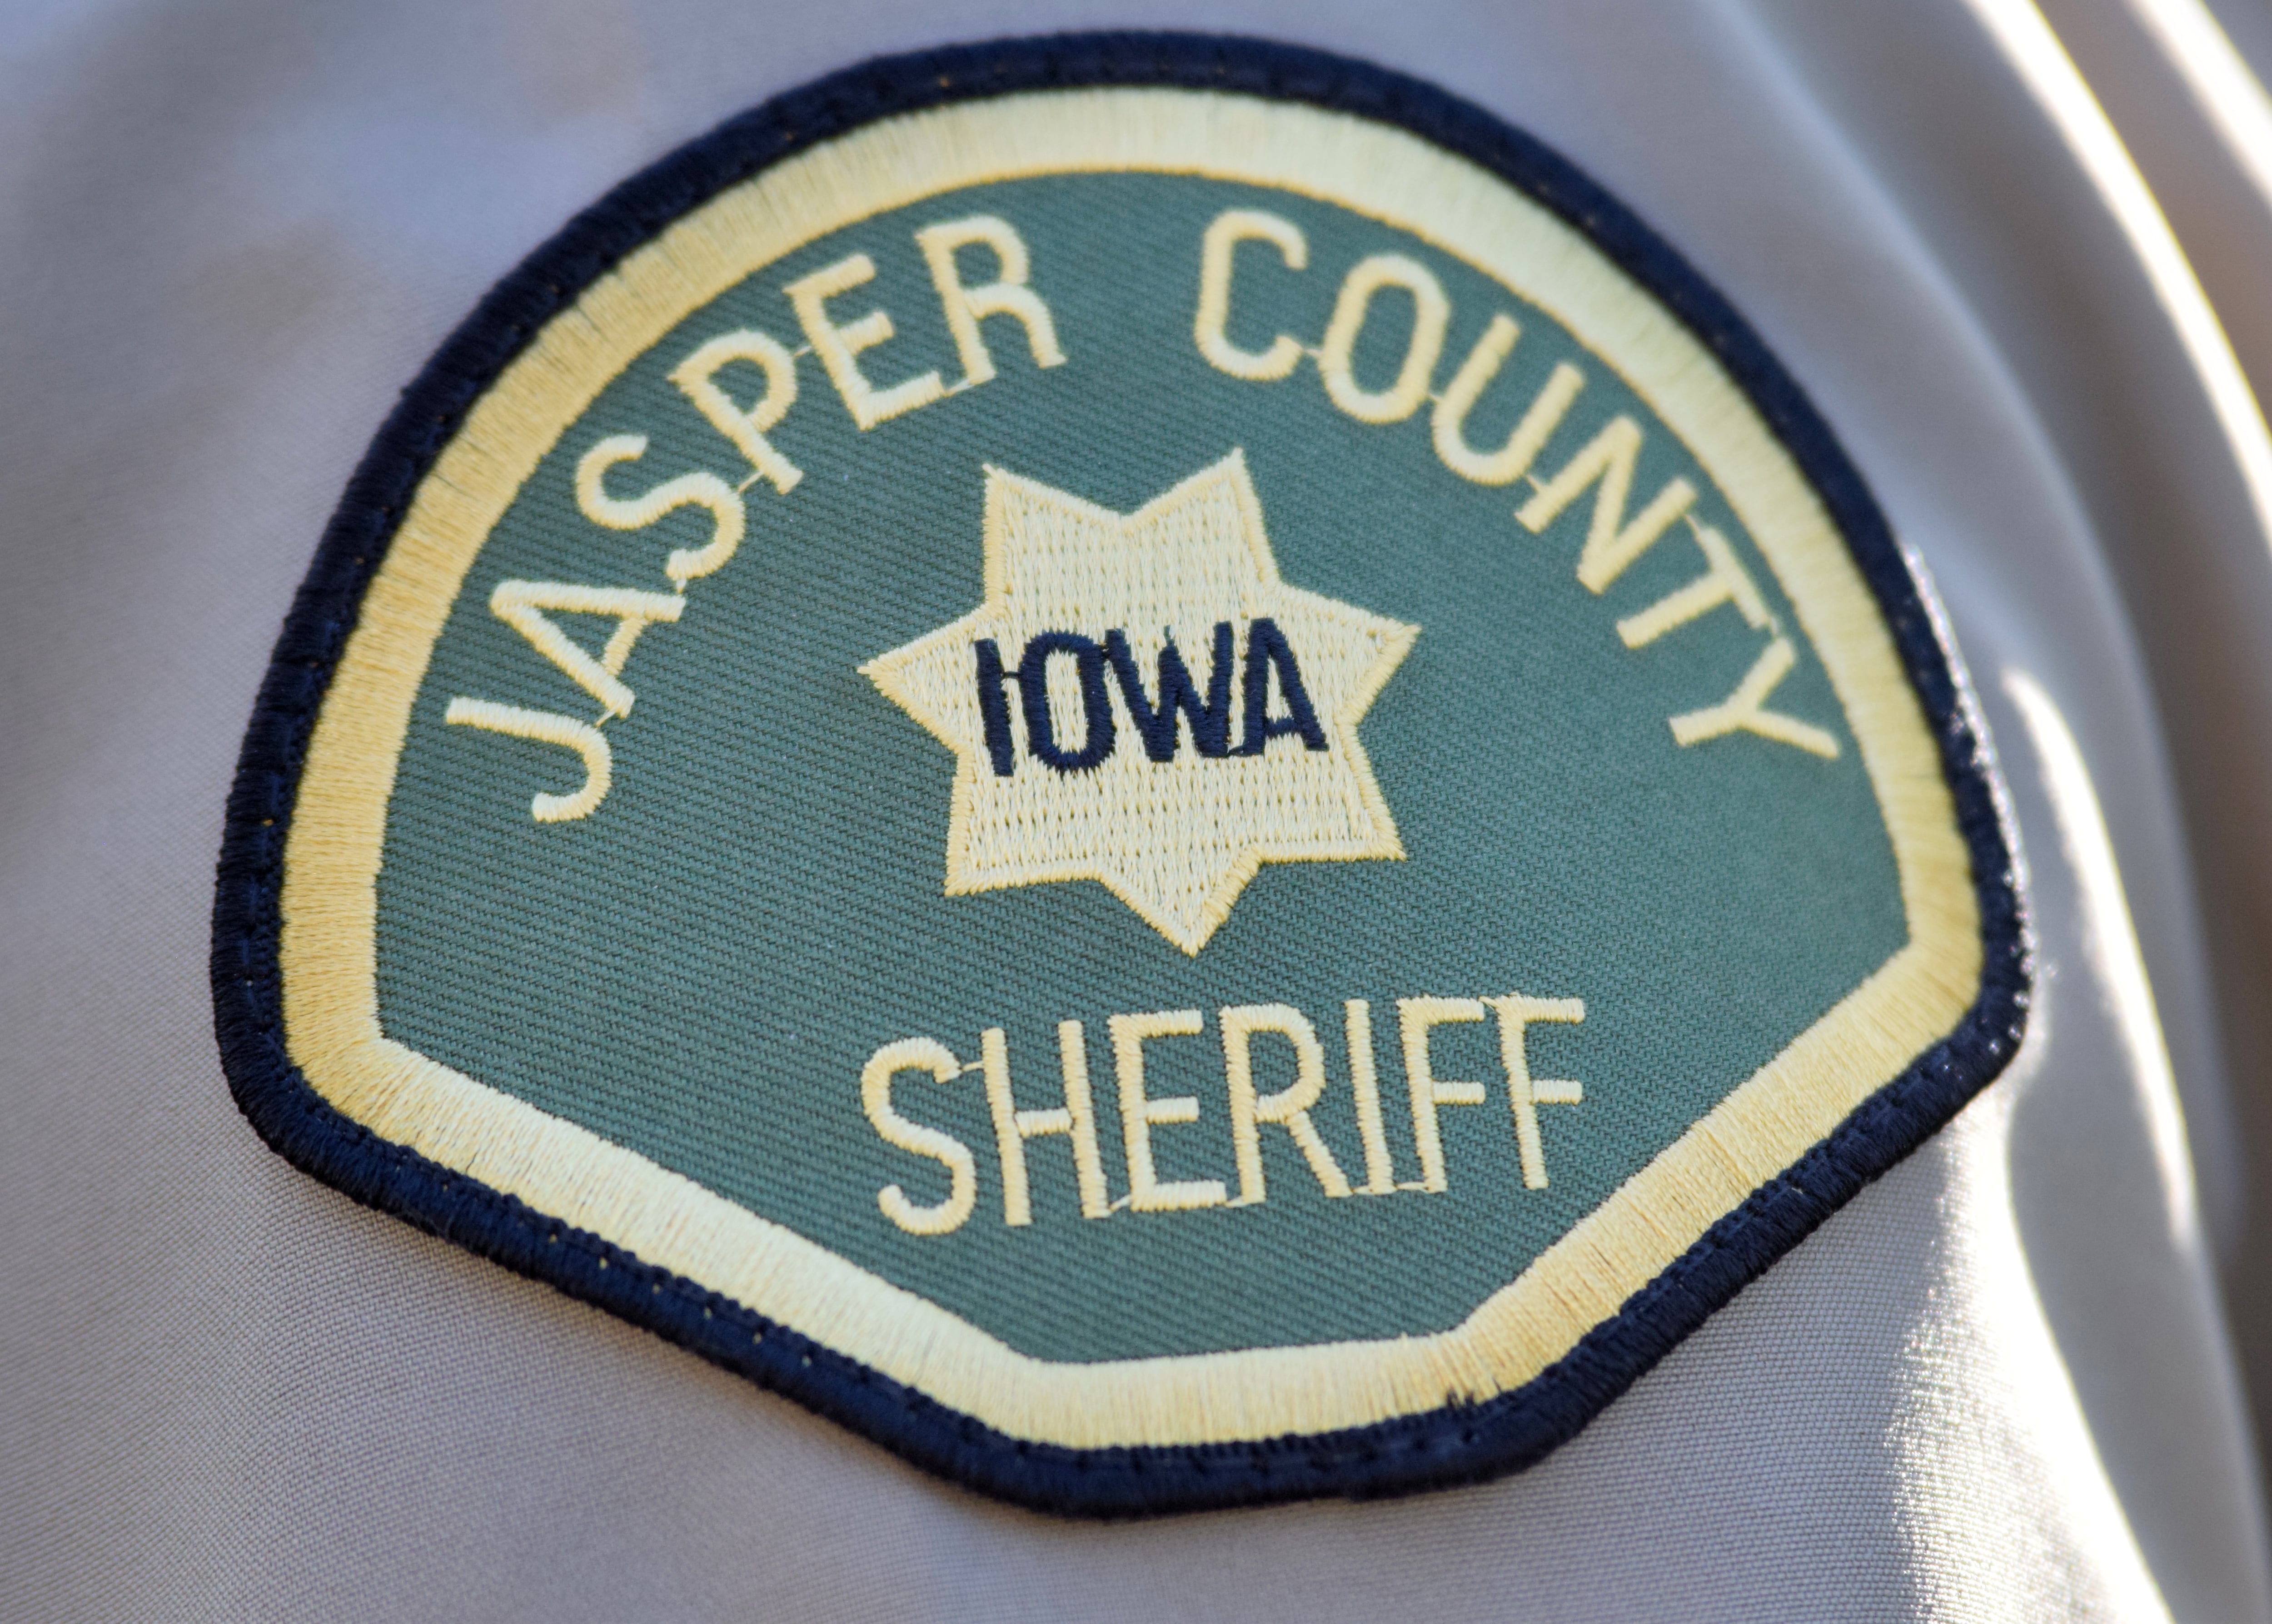 Jasper County Jail to charge a little extra to hold out-of-county inmates